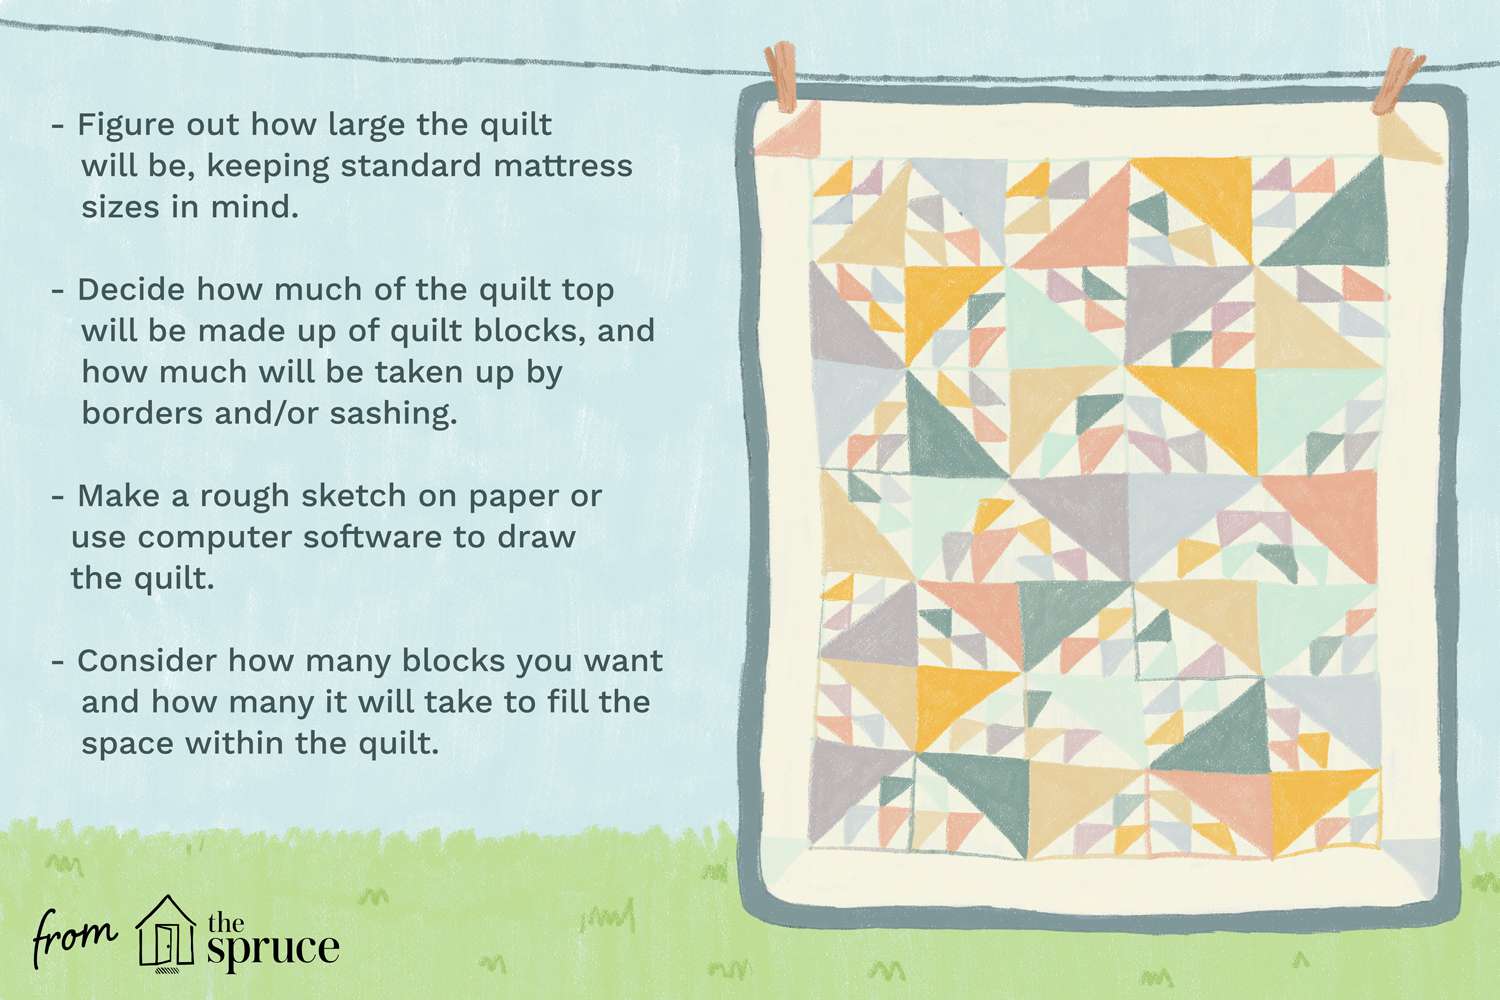 How To Determine How Many Yards Of Fabric You Need For A Queen Size Quilt